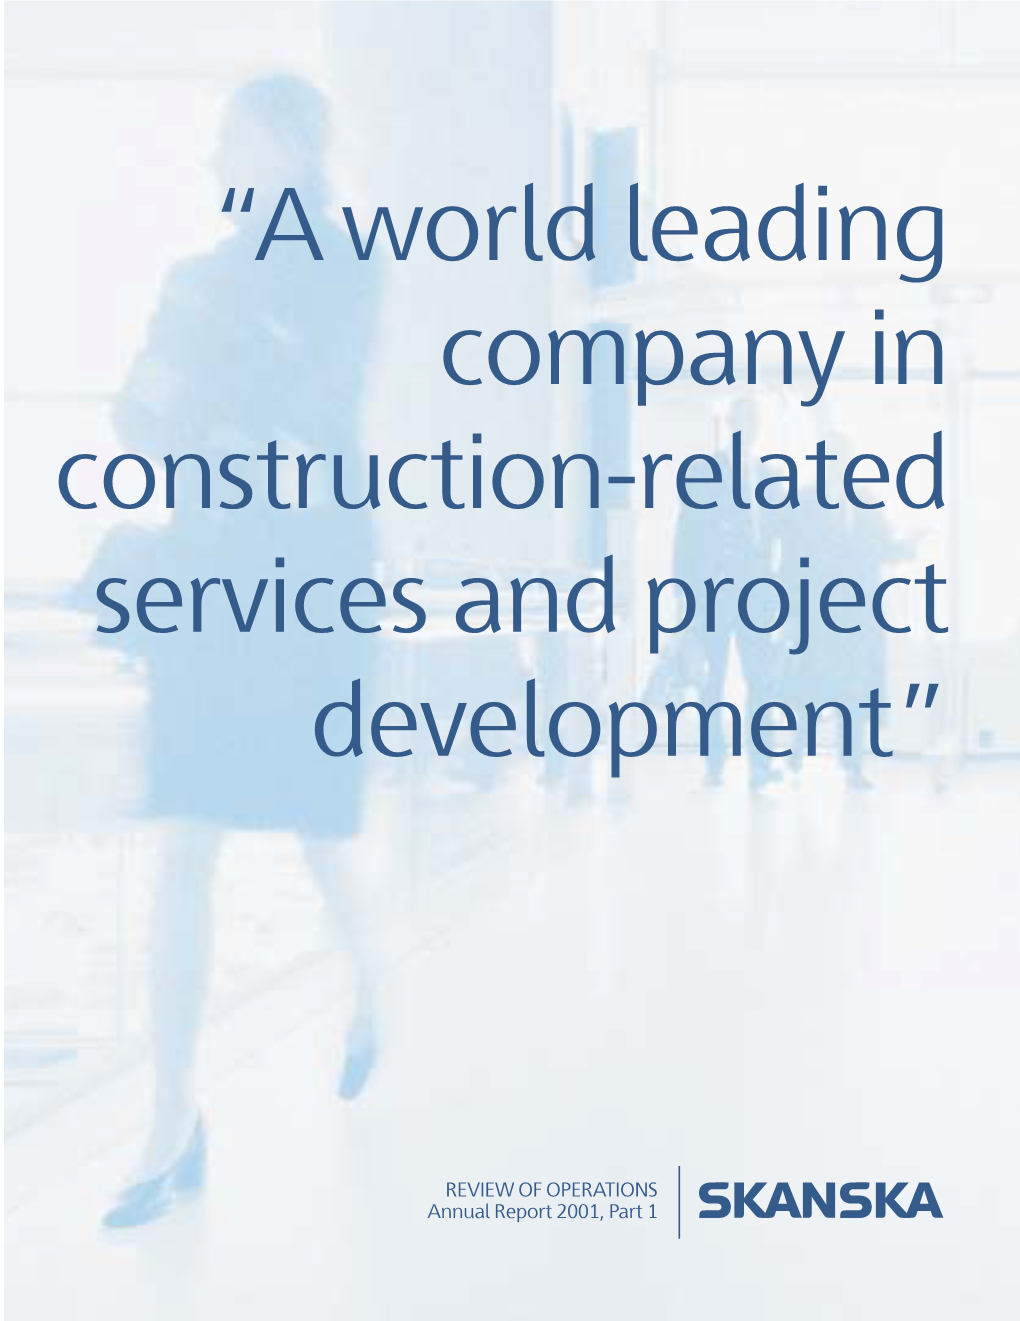 “A World Leading Company in Construction-Related Services and Project Development”